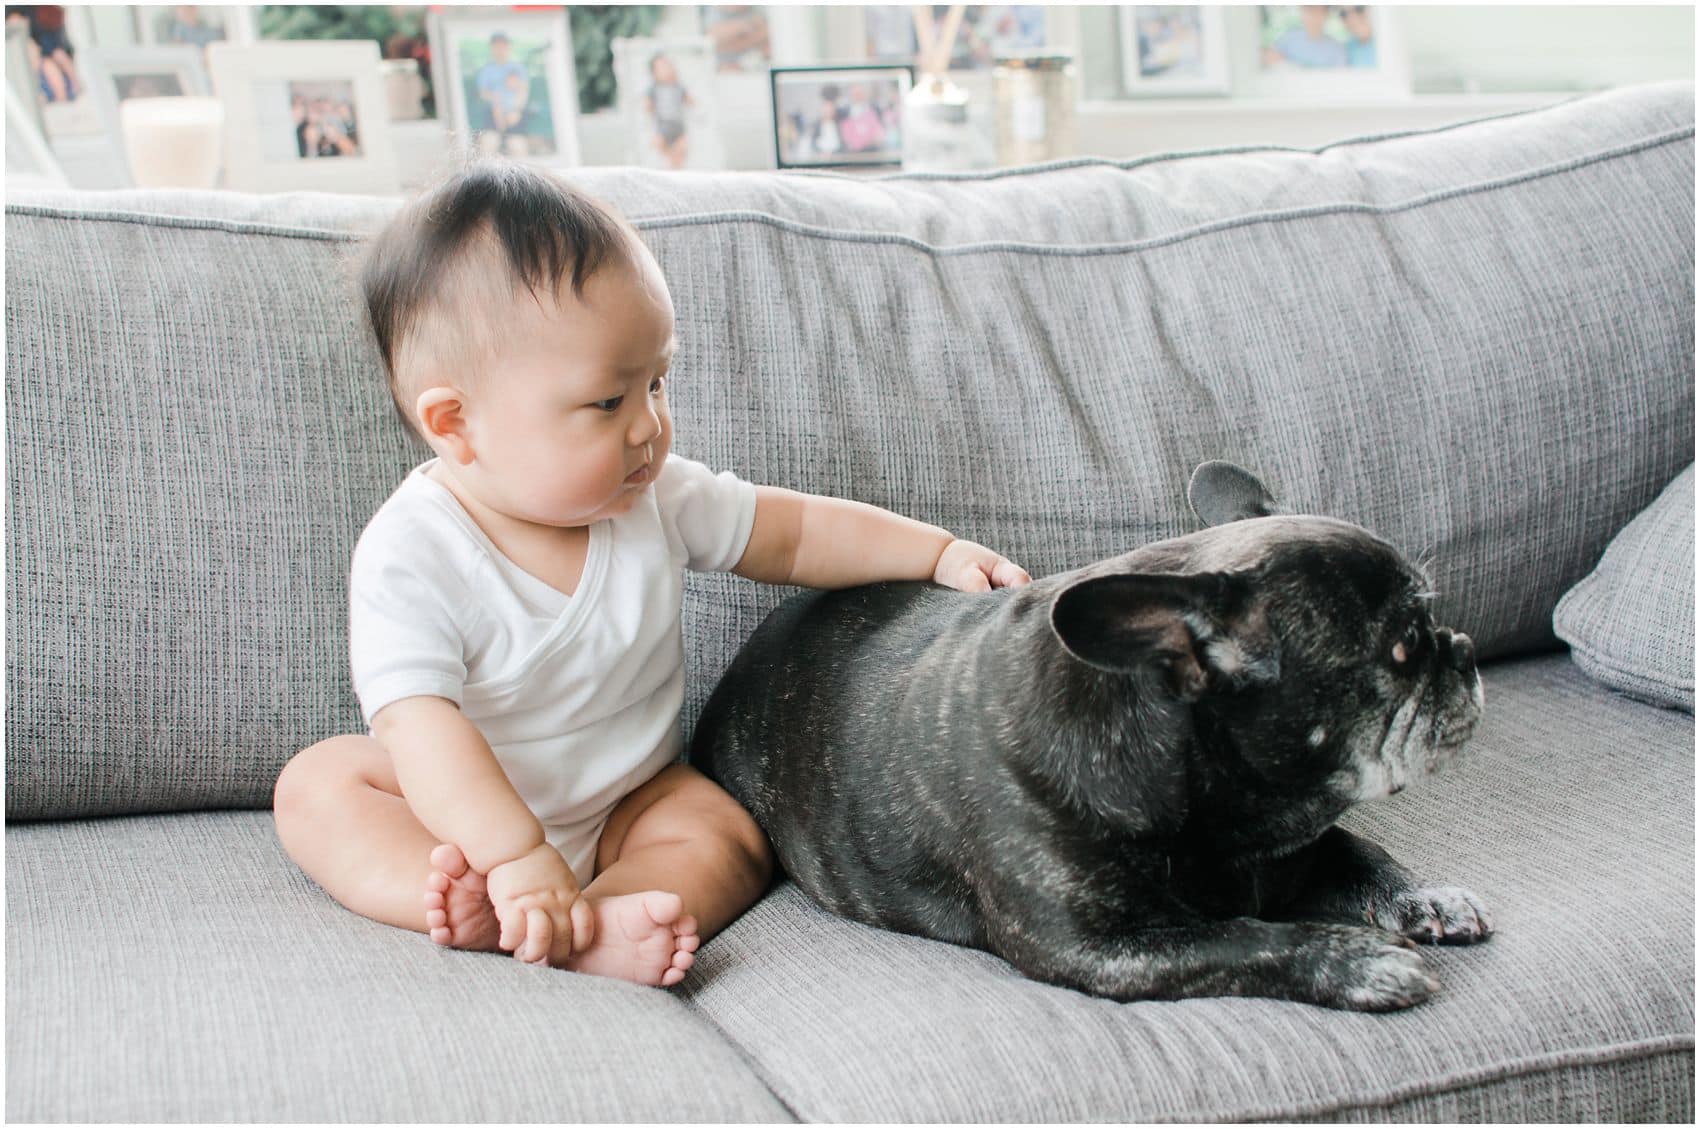 NYC baby photographer Miriam Dubinsky captures baby boy with a French bulldog as his pet sitting on the grey couch 